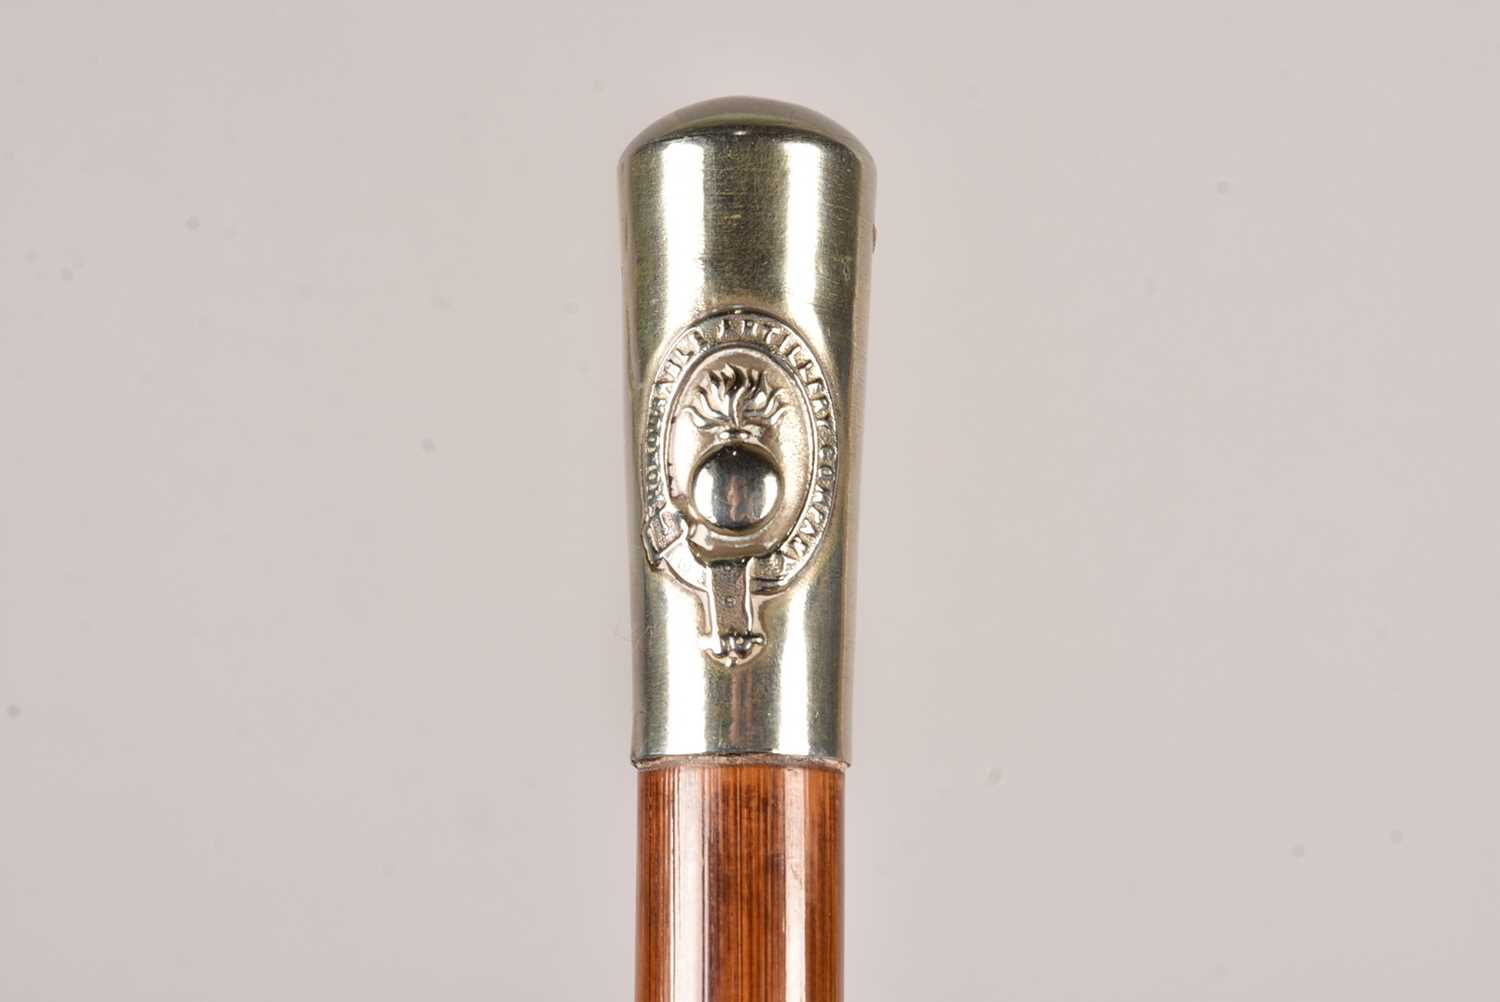 An Honourable Artillery Company (HAC) white metal topped swagger sword stick, - Image 4 of 6